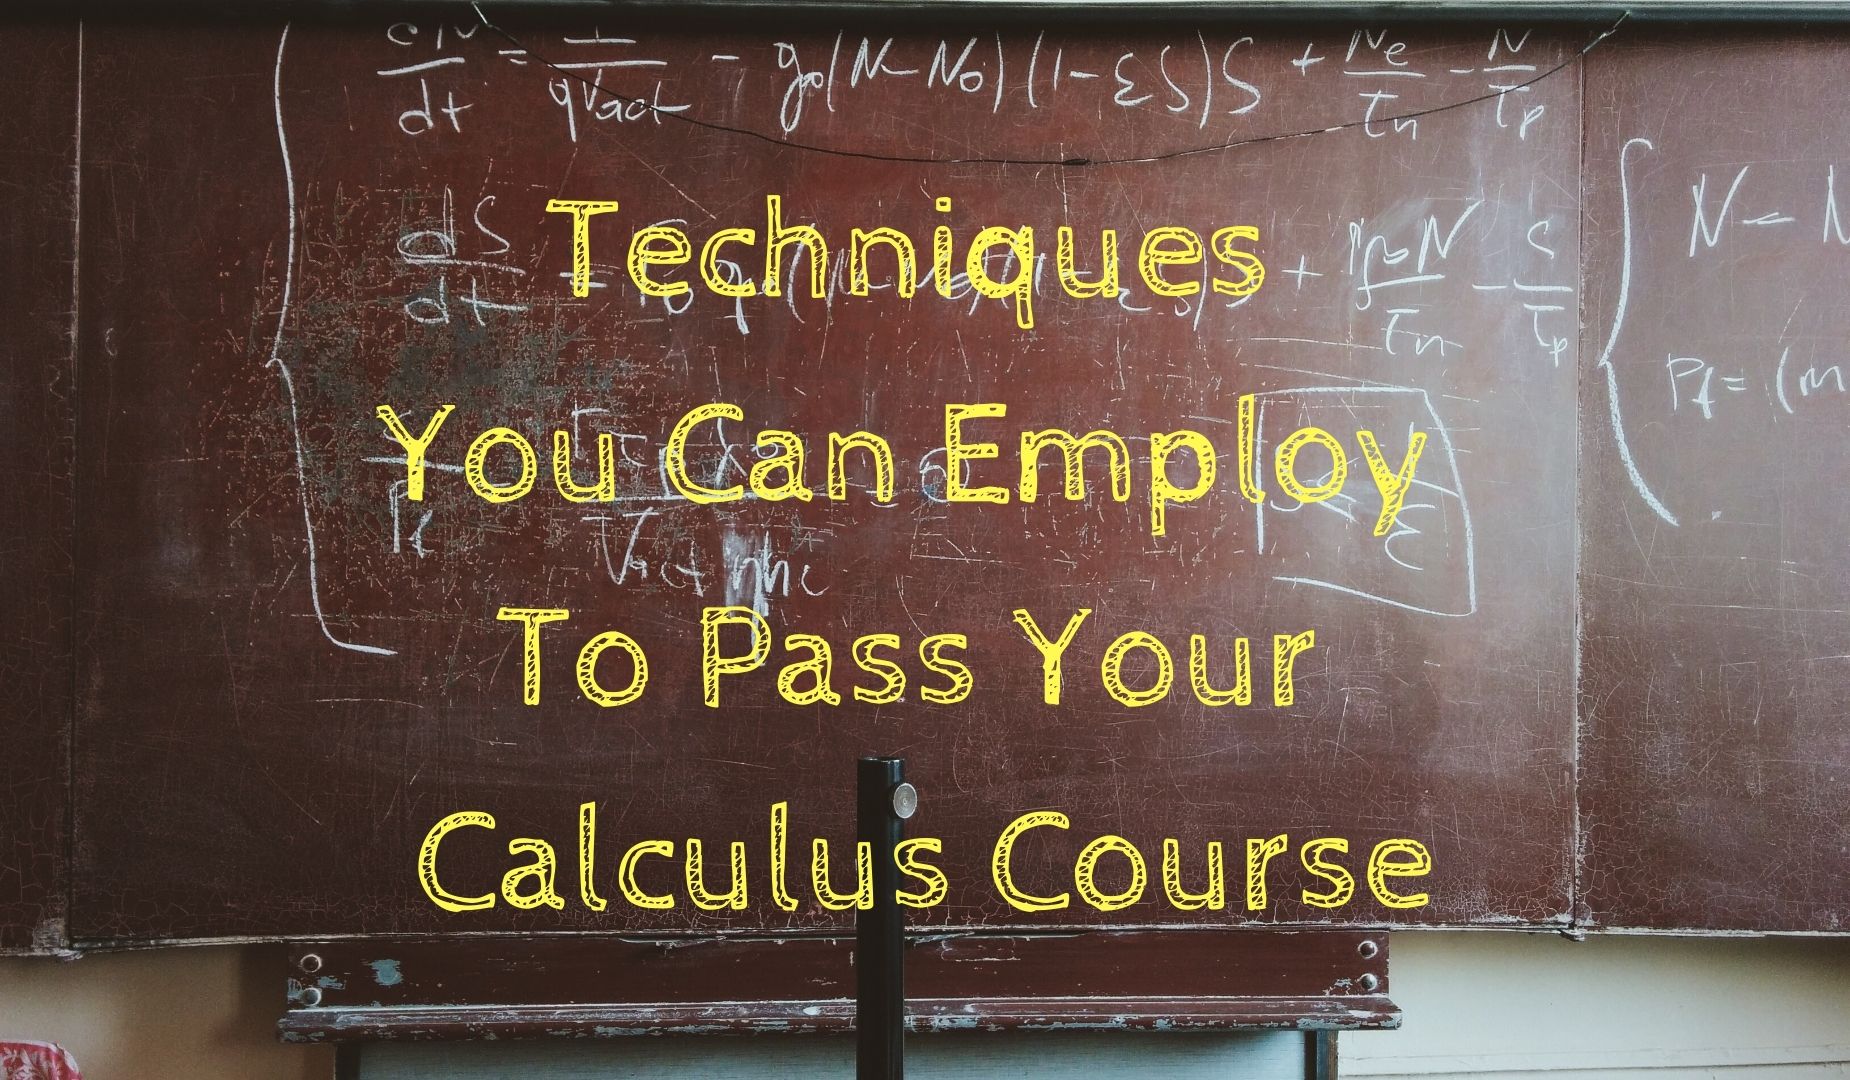 Techniques you can employ to pass your calculus course